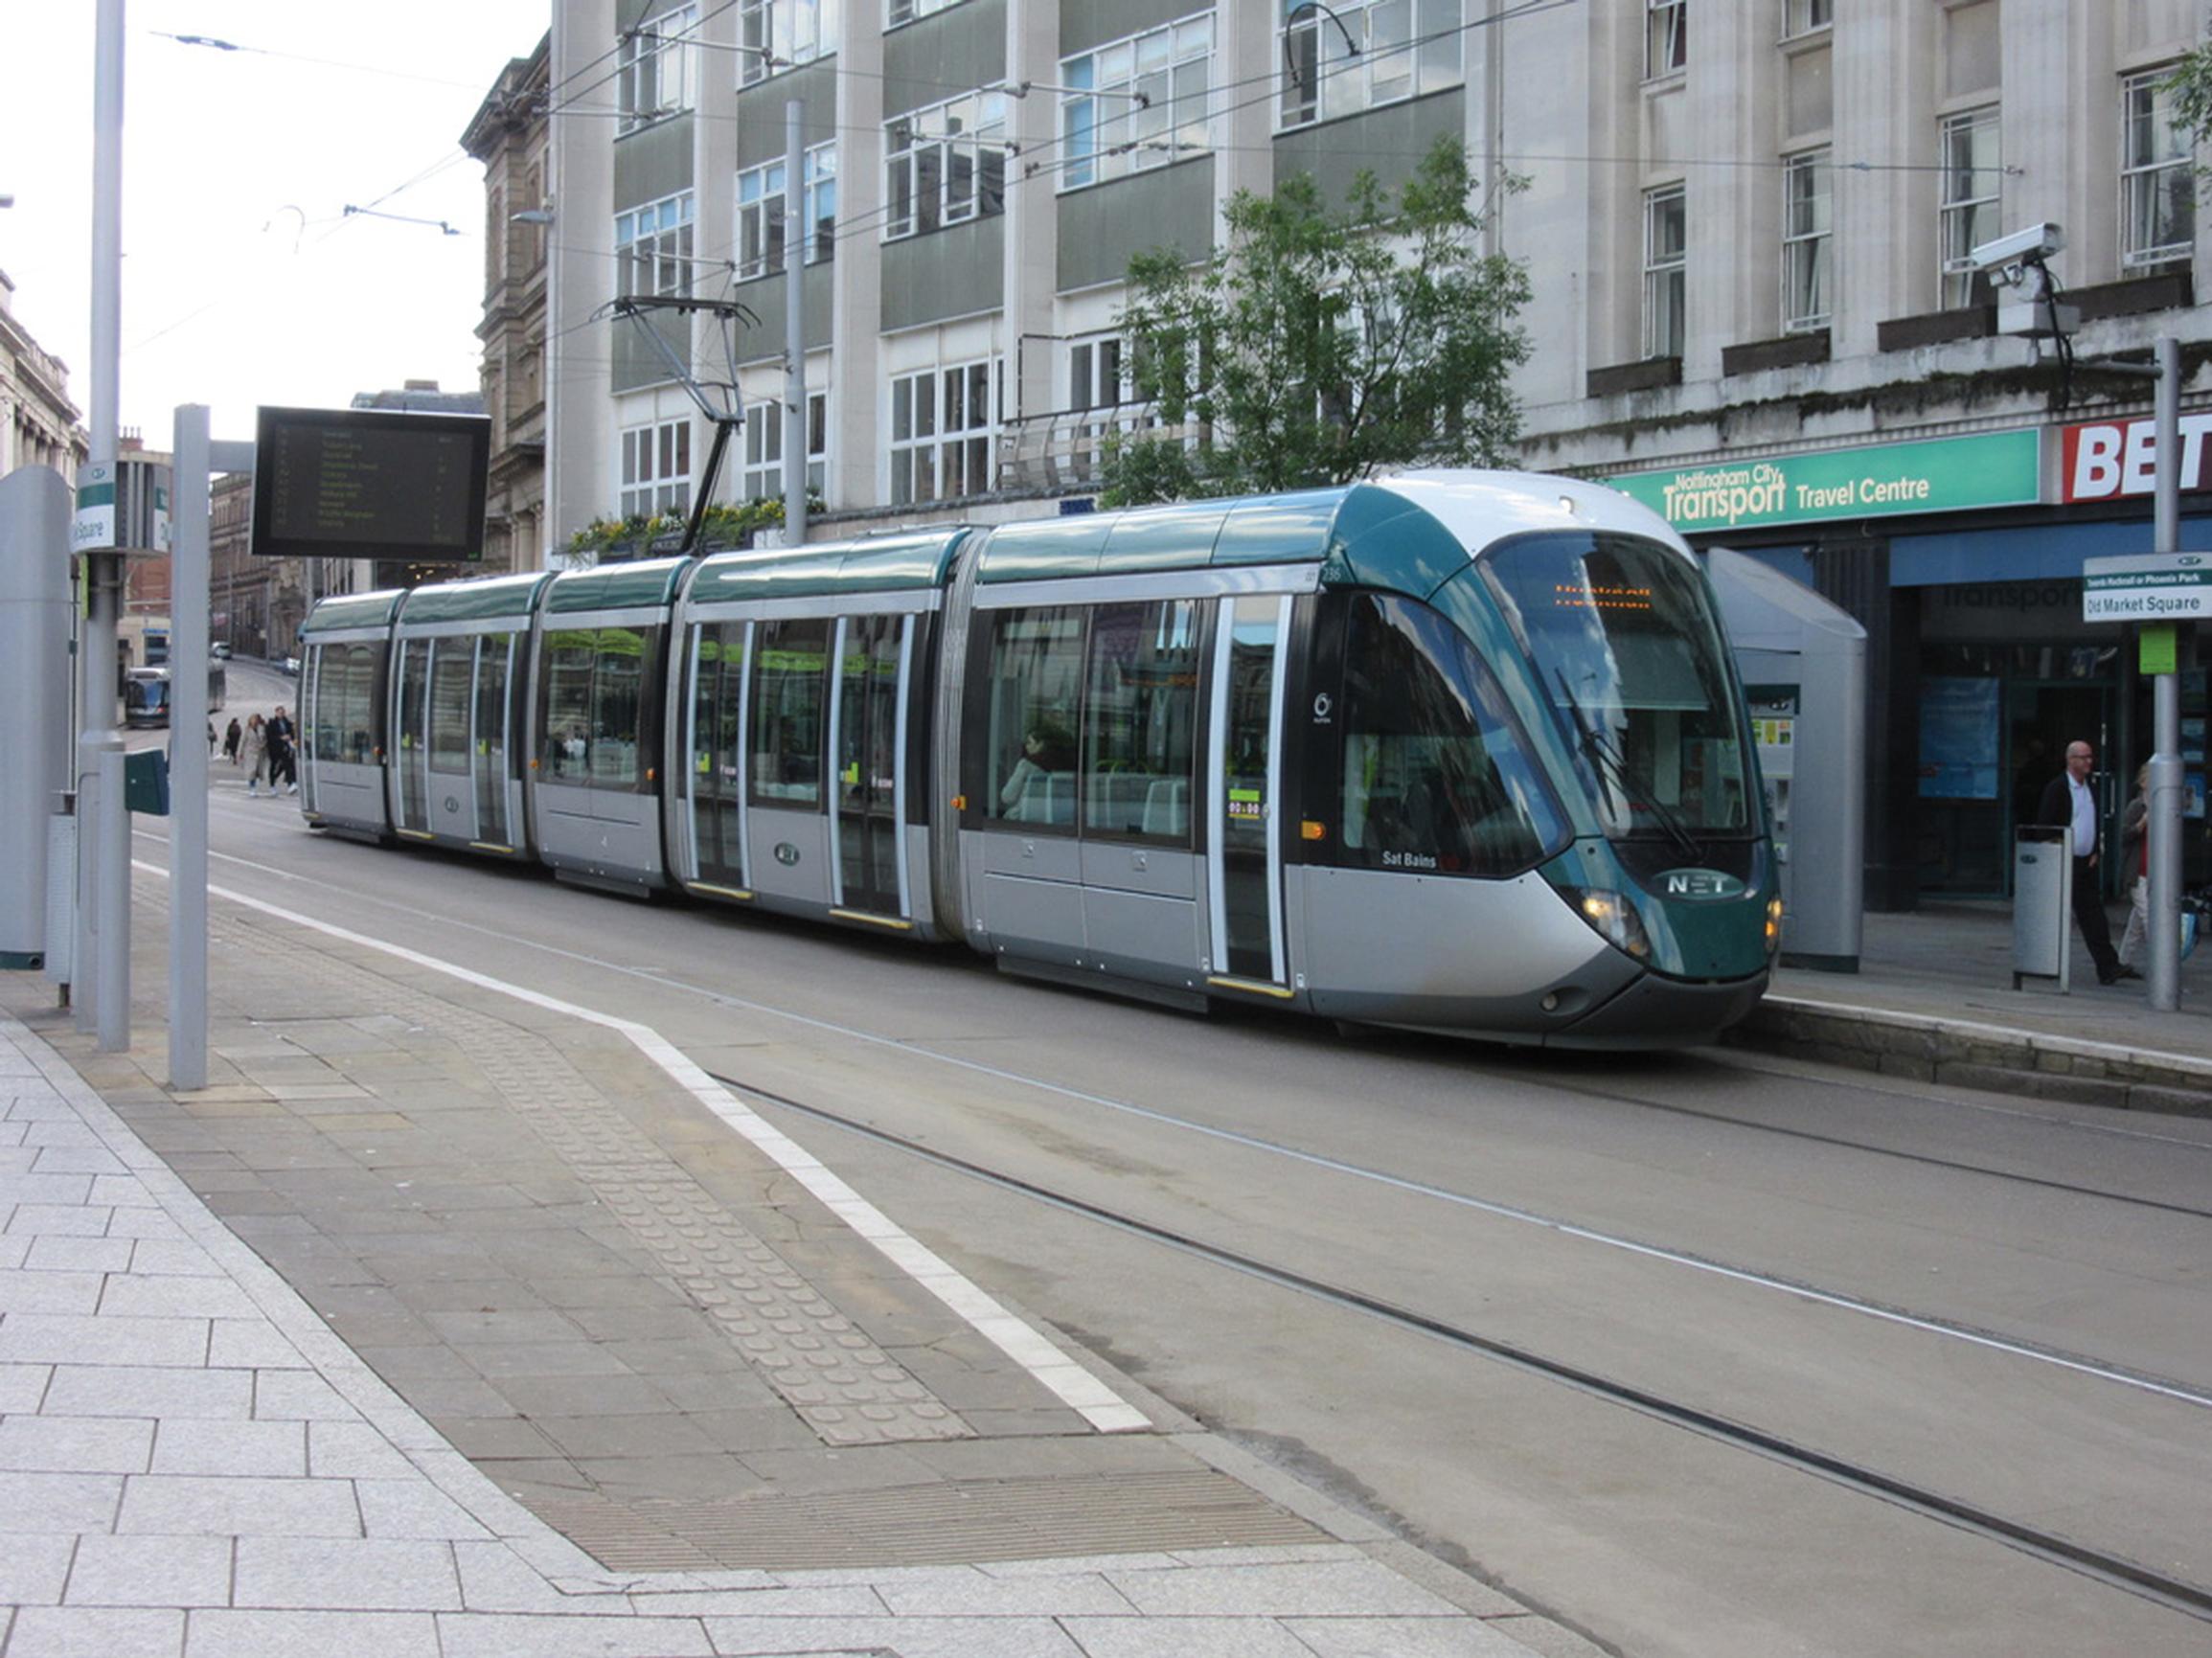 It takes a lot longer to build a tram network than widen some roads. But Nottingham shows it can be done, and others must learn from the example